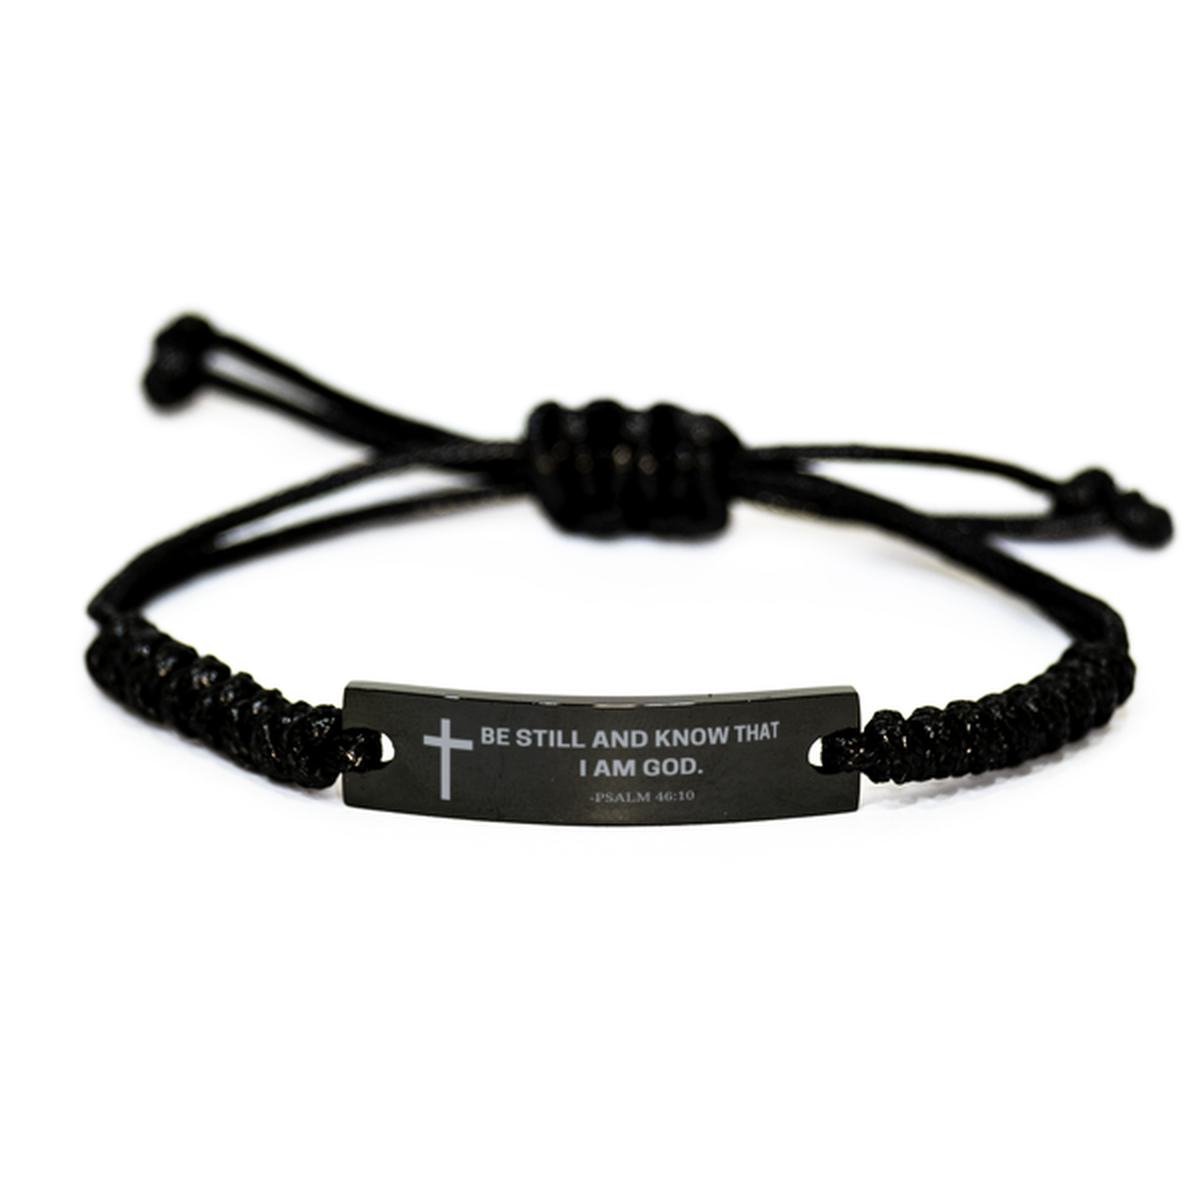 Baptism Gifts For Teenage Boys Girls, Christian Bible Verse Black Rope Bracelet, Be still and know that I am god, Catholic Confirmation Gifts for Son, Godson, Grandson, Nephew